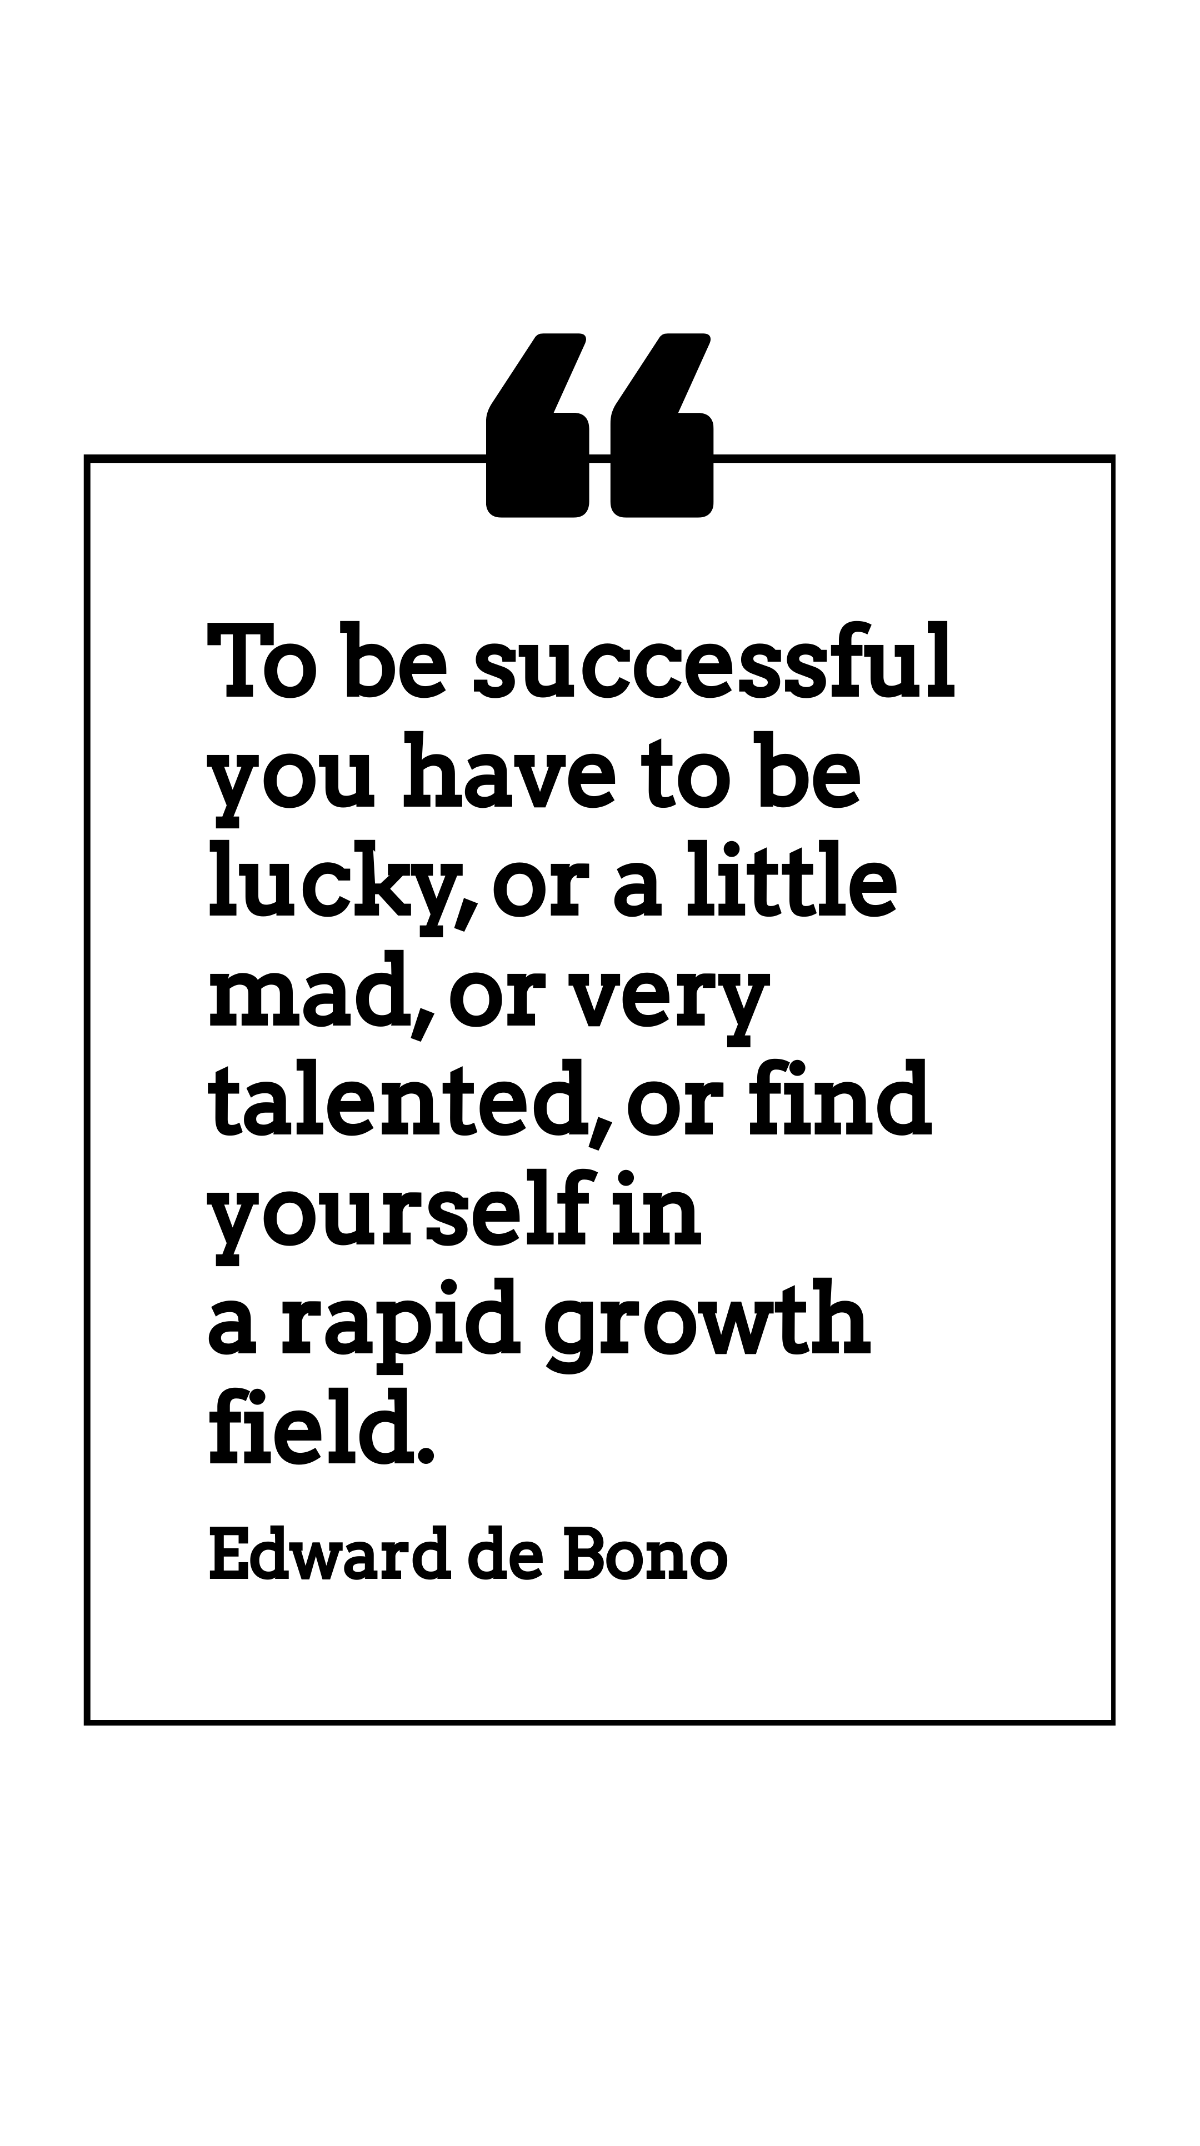 Edward de Bono - To be successful you have to be lucky, or a little mad, or very talented, or find yourself in a rapid growth field. Template